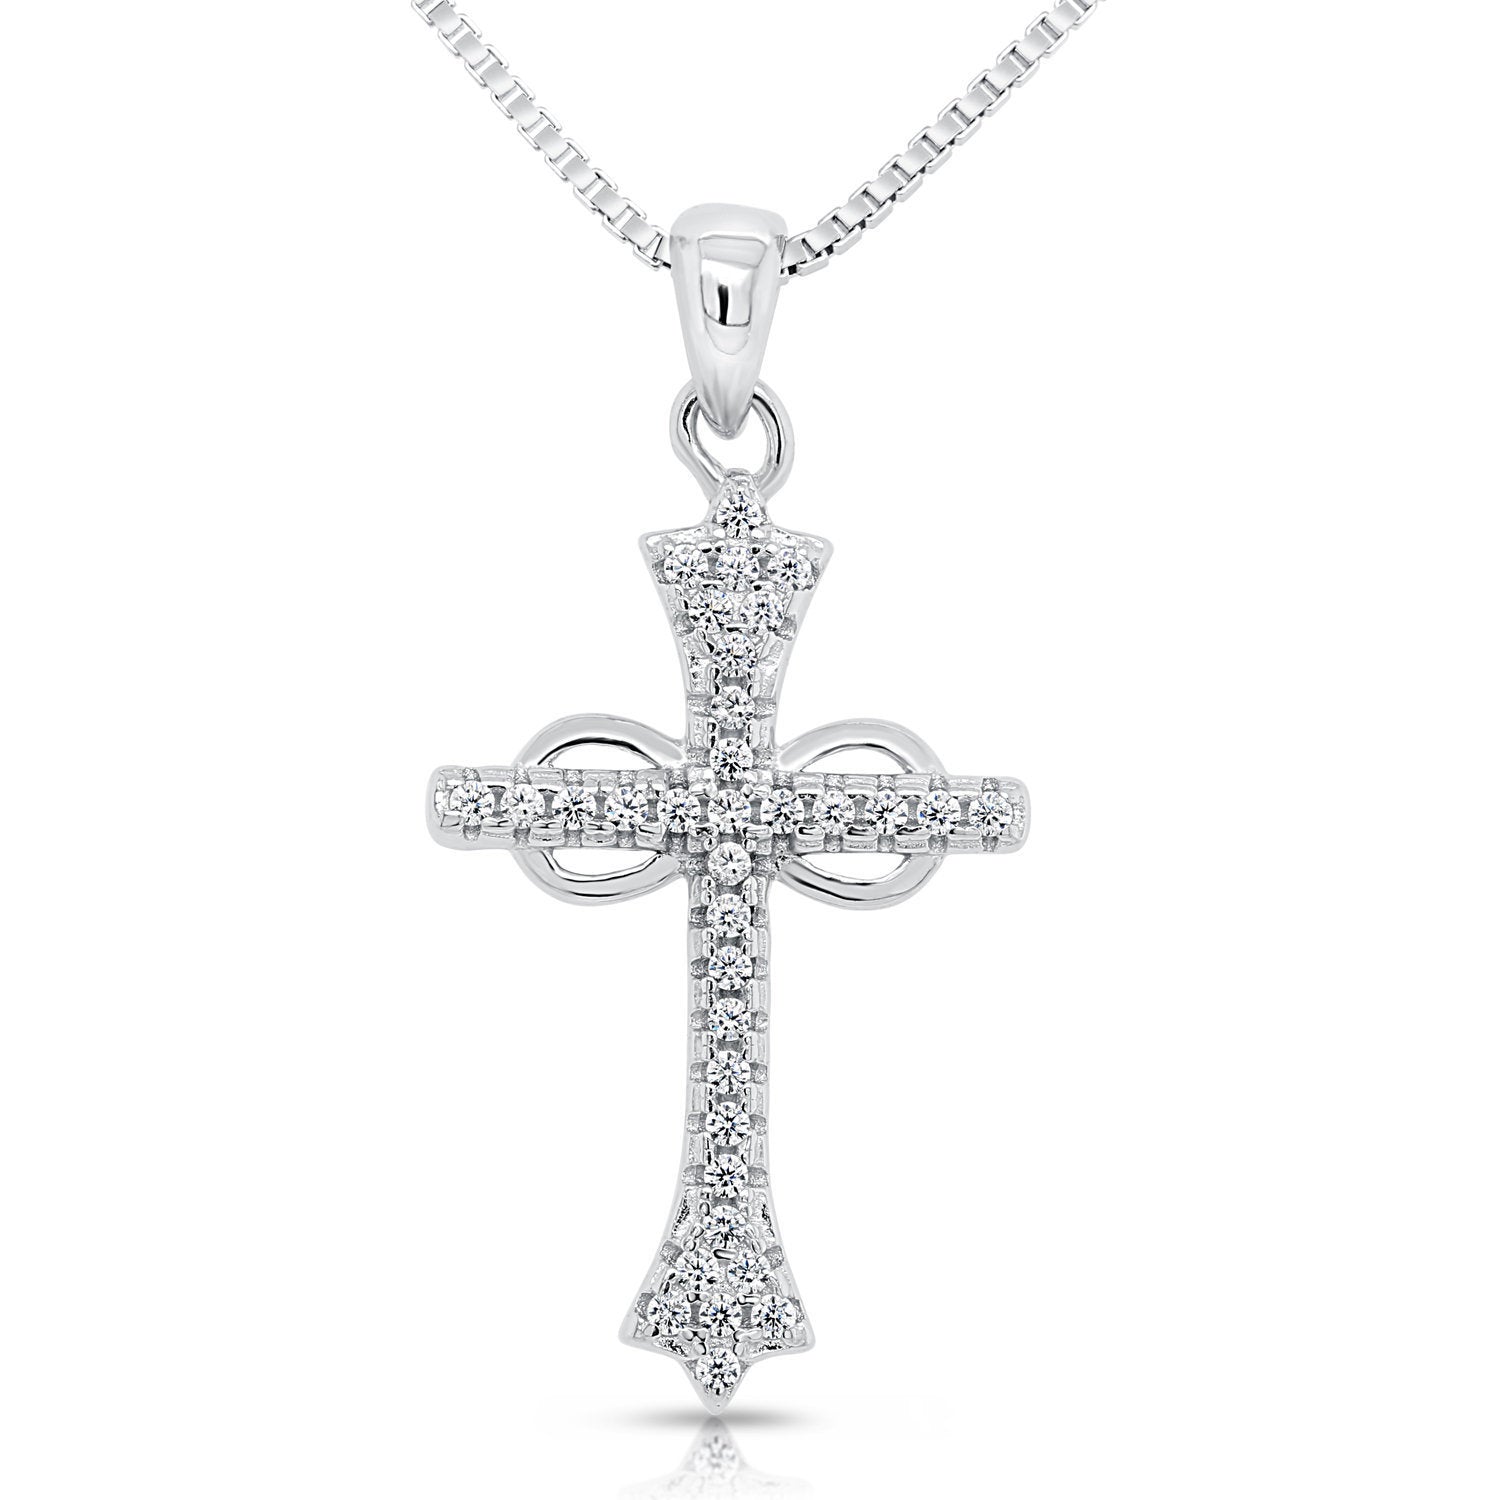 CZ Infinity Cross Charm Necklace in Sterling Silver